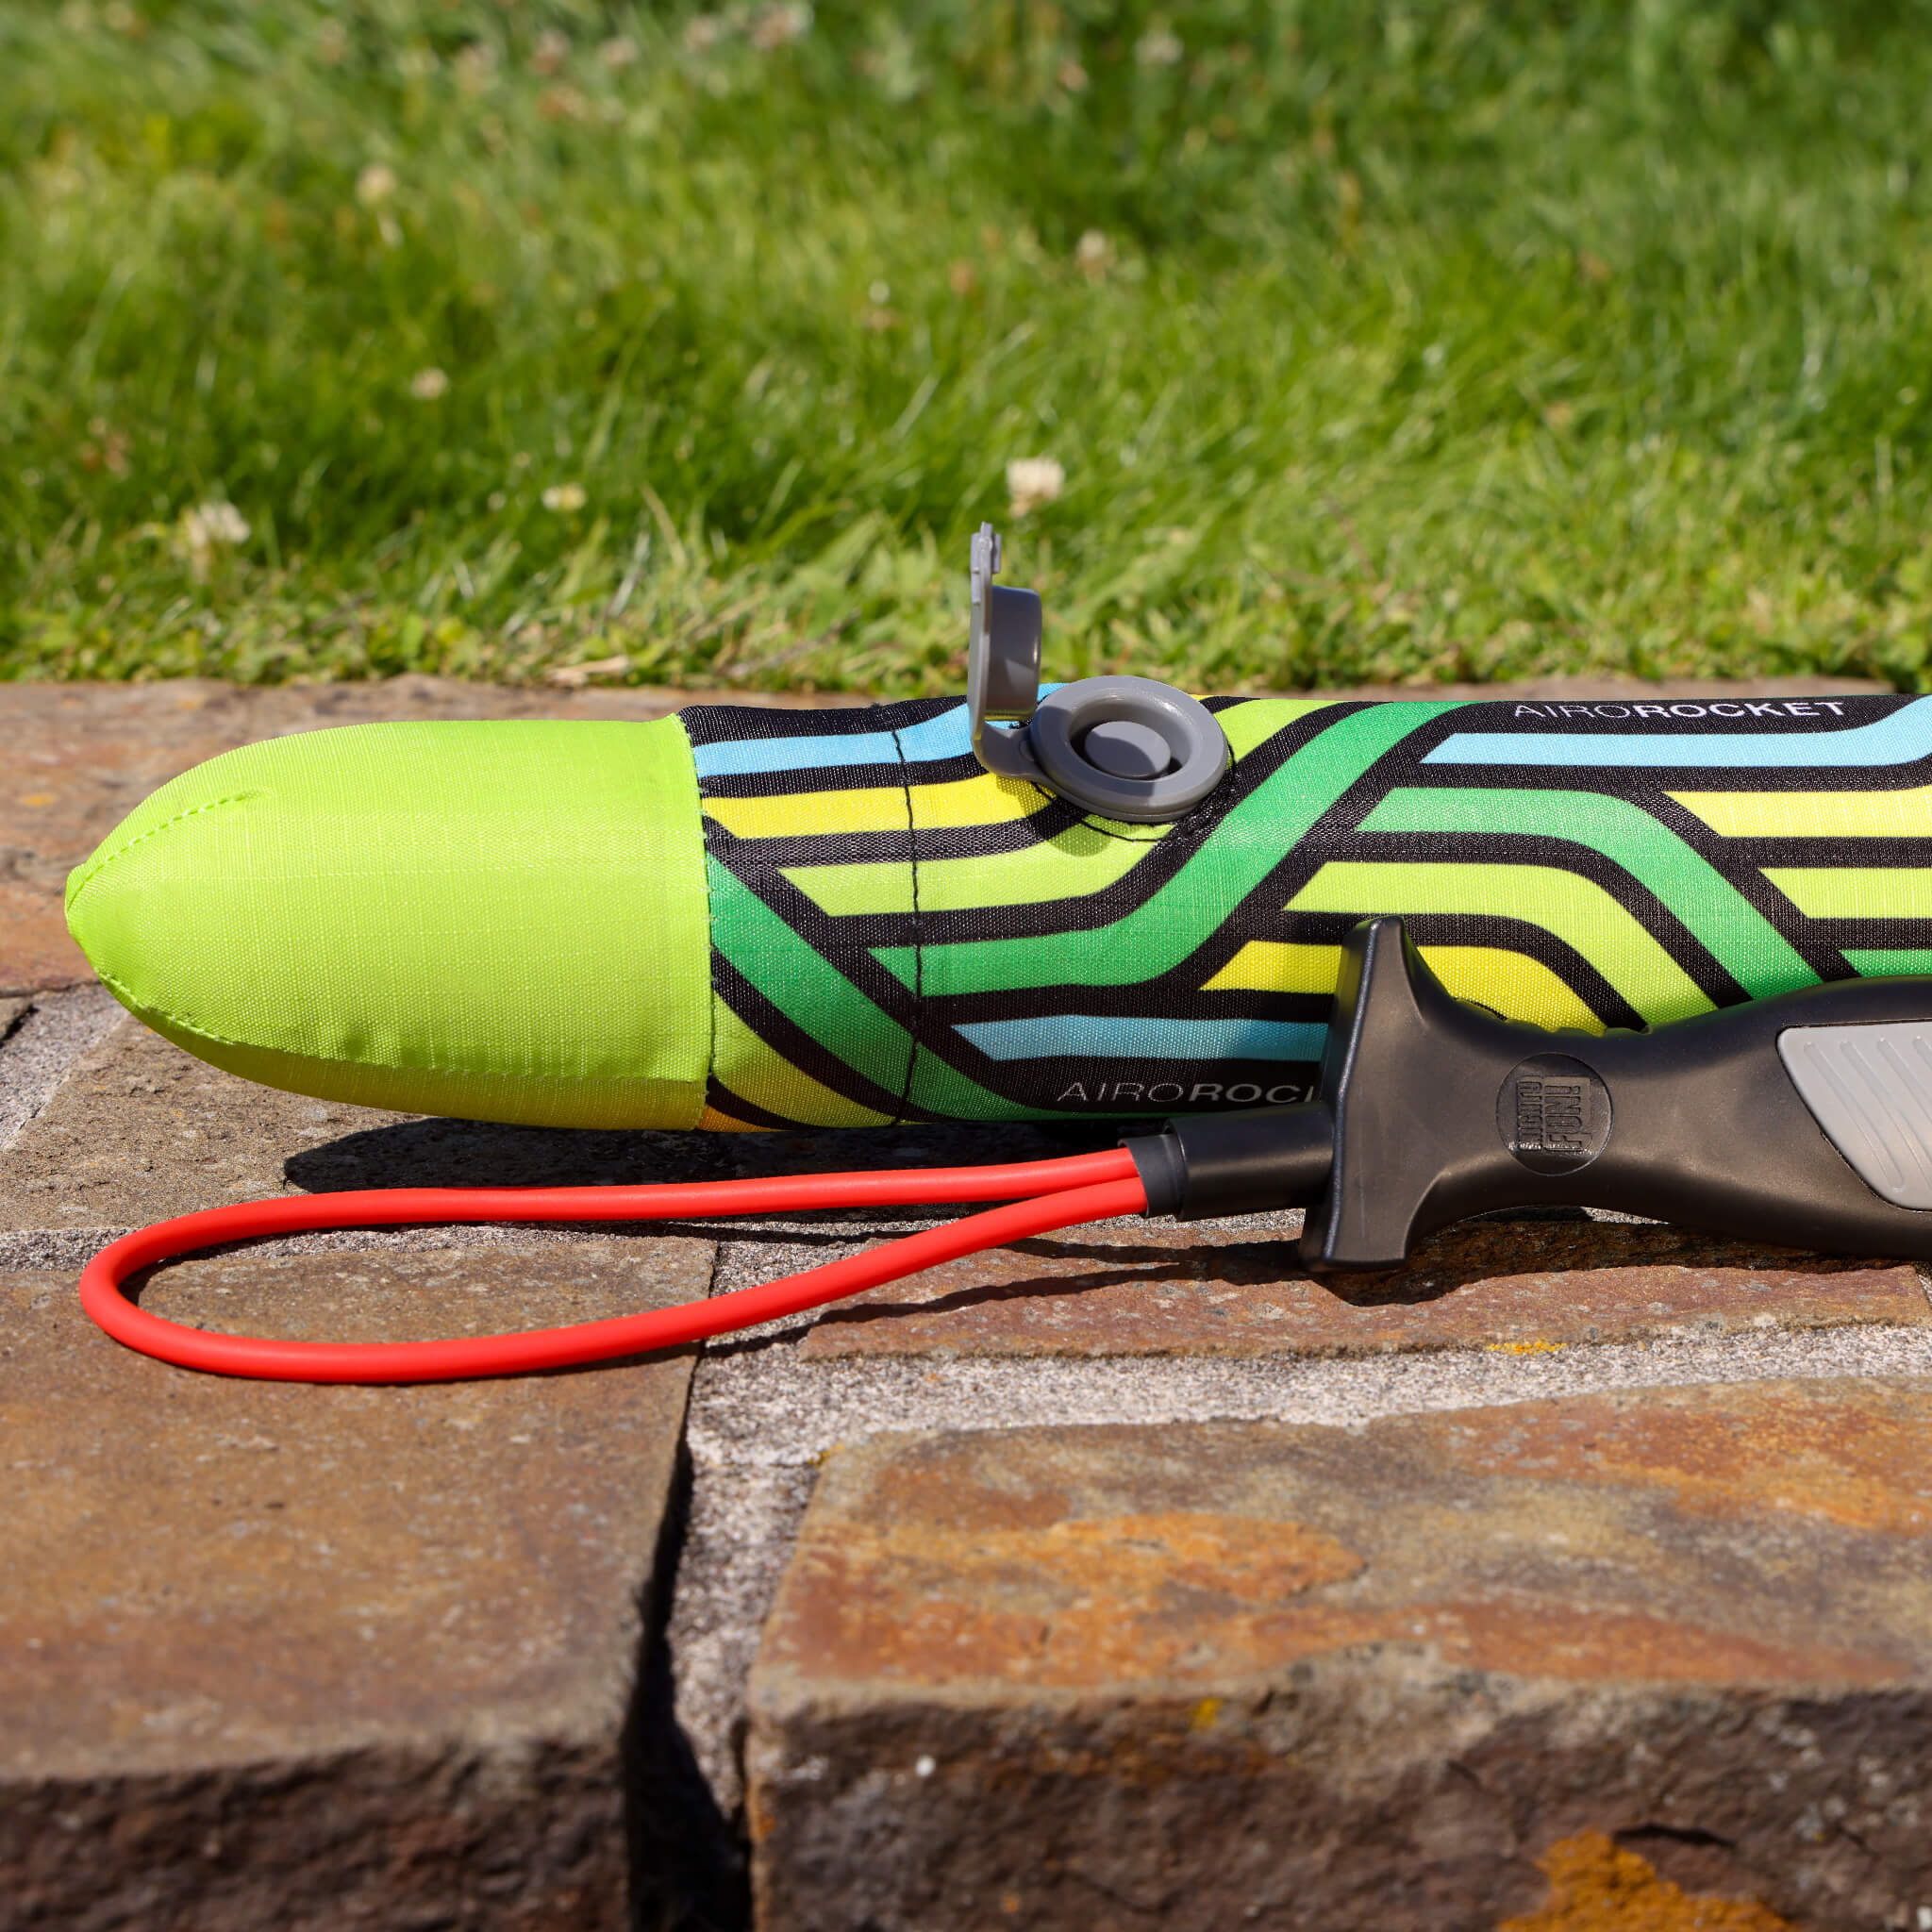 Lime Airo Rocket toy rocket with inflating valve by Mighty Fun!